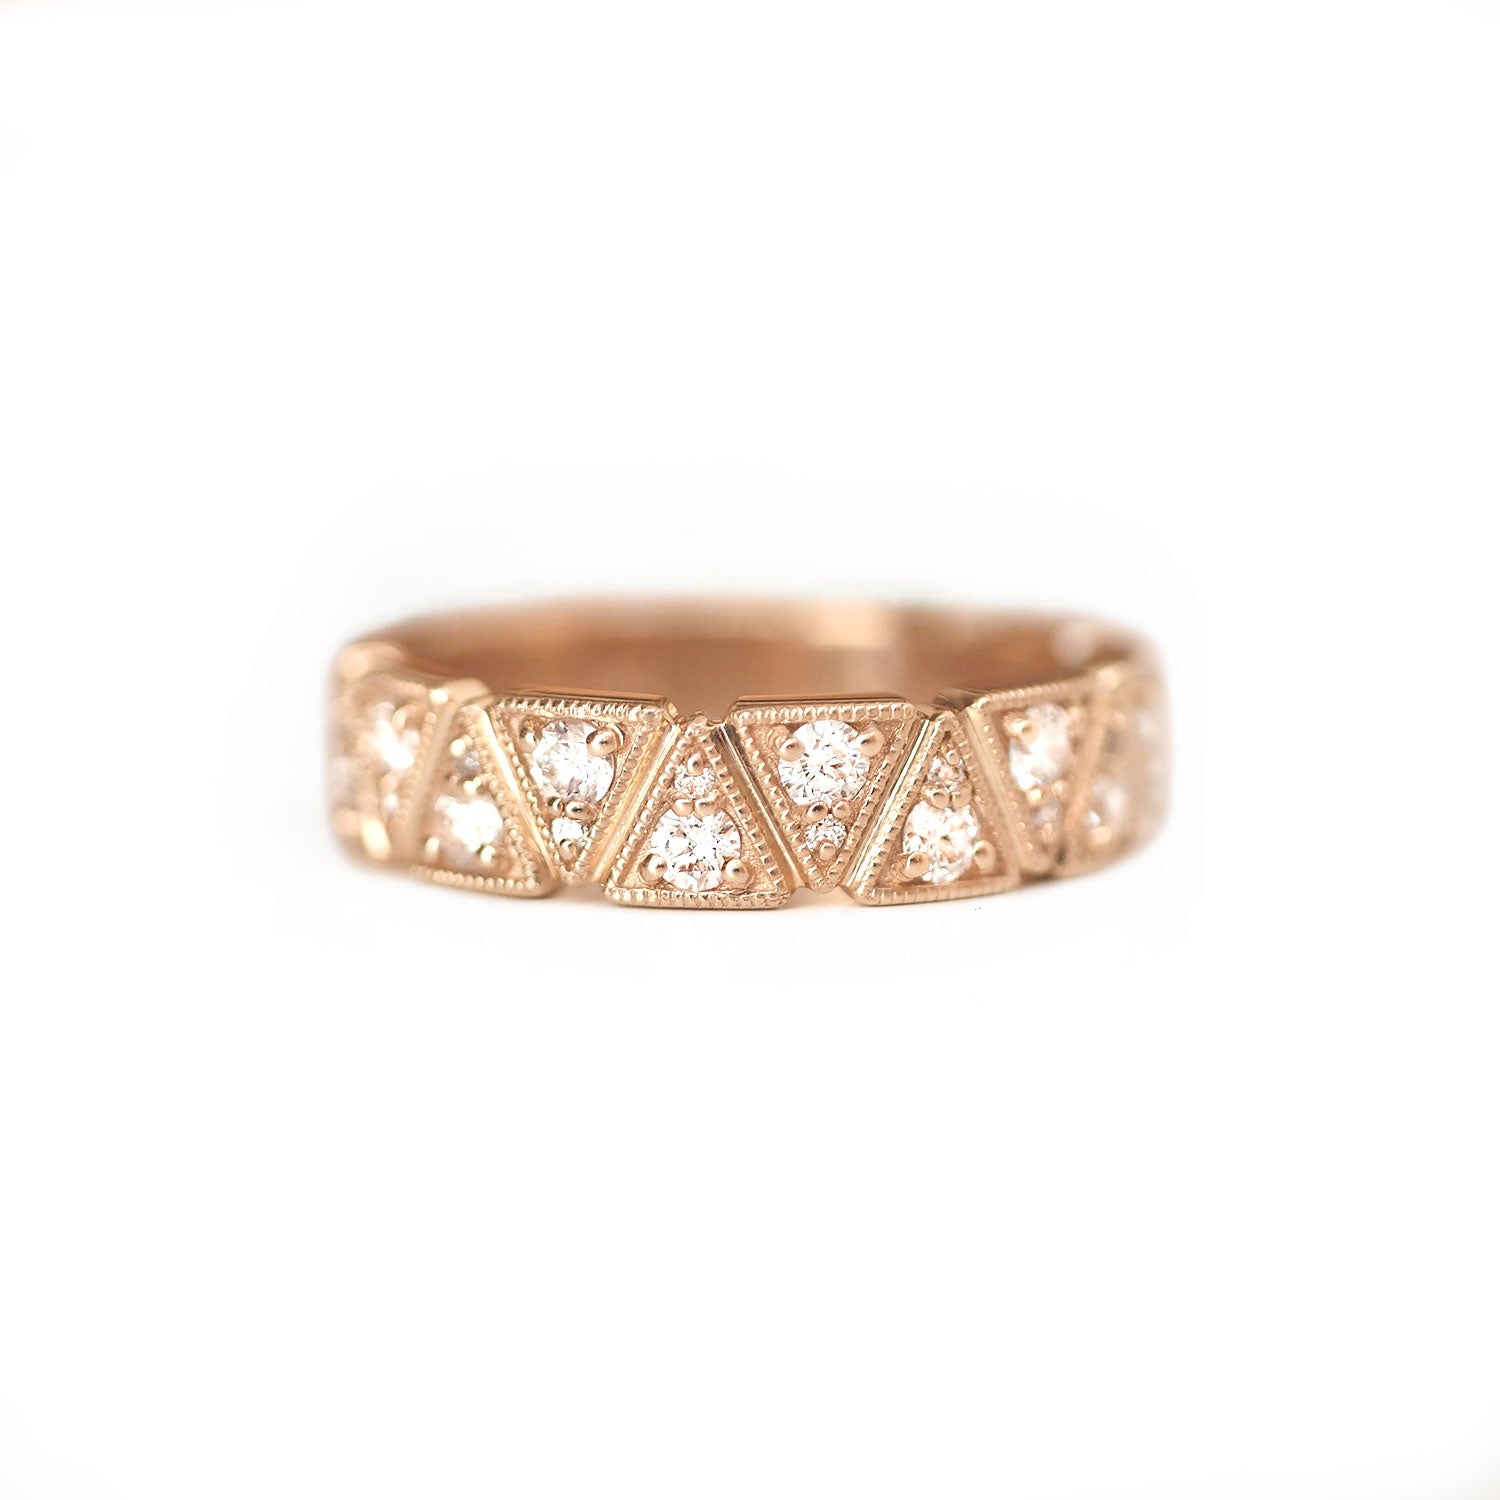 5mm Geometric Triangle and Diamond Mens Band Ring | Berlinger Jewelry